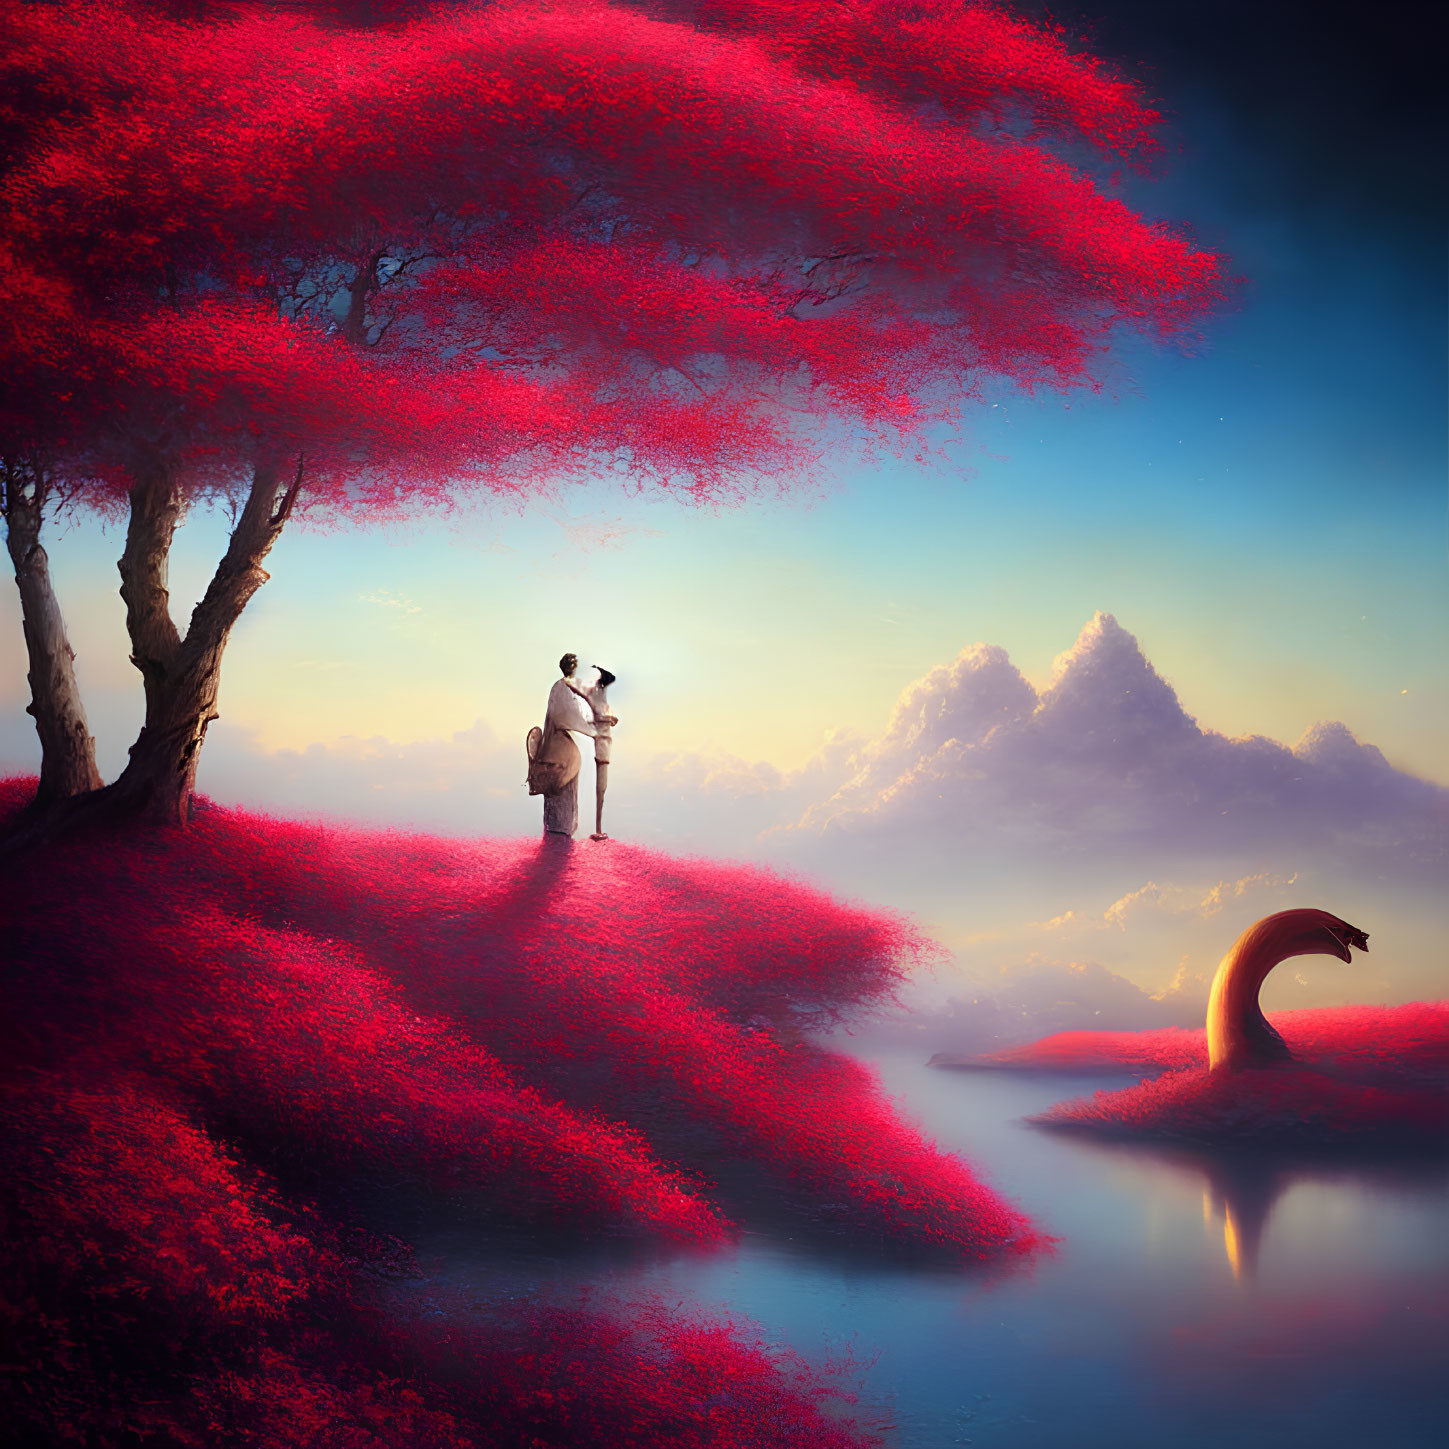 Surreal scene: couple under red tree, lake view, mysterious creature.